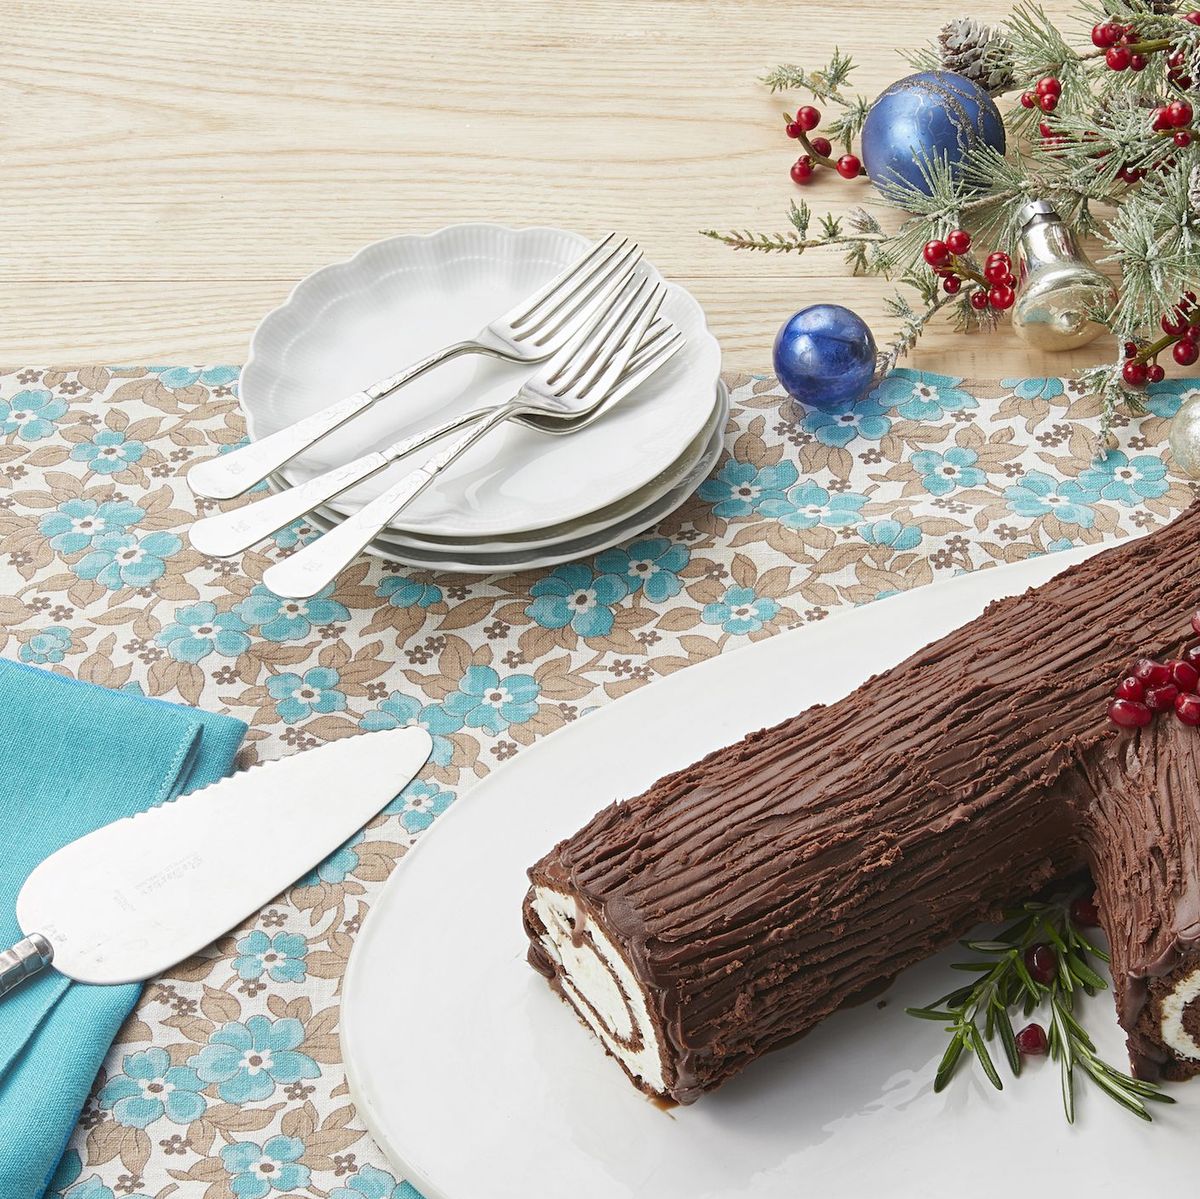 Christmas Yule Log Cake - The Country Cook